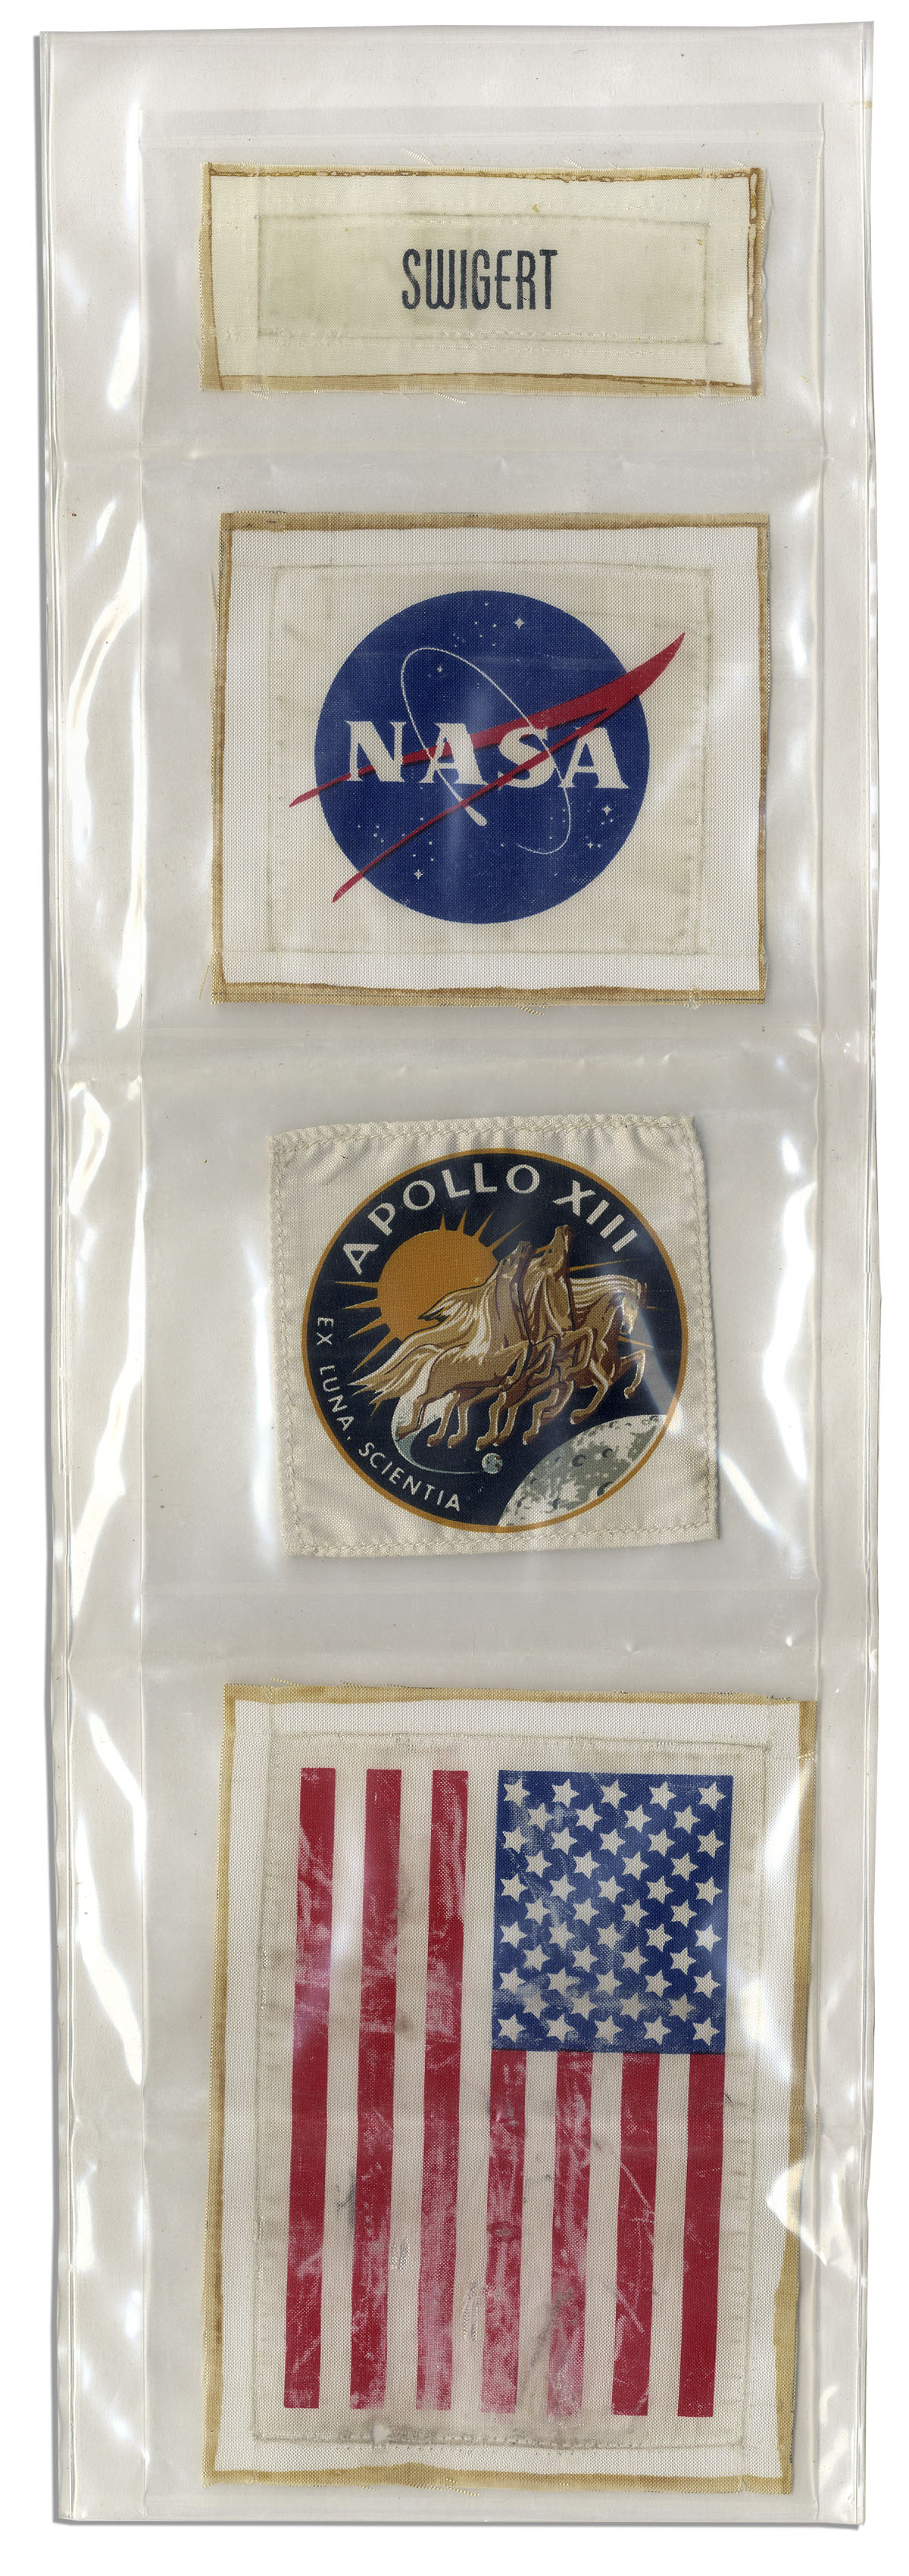 Flown Apollo 13 Space Suit Patch Very Scarce Collection of Four Jack Swigert Flown Apollo 13 Space Suit Patches